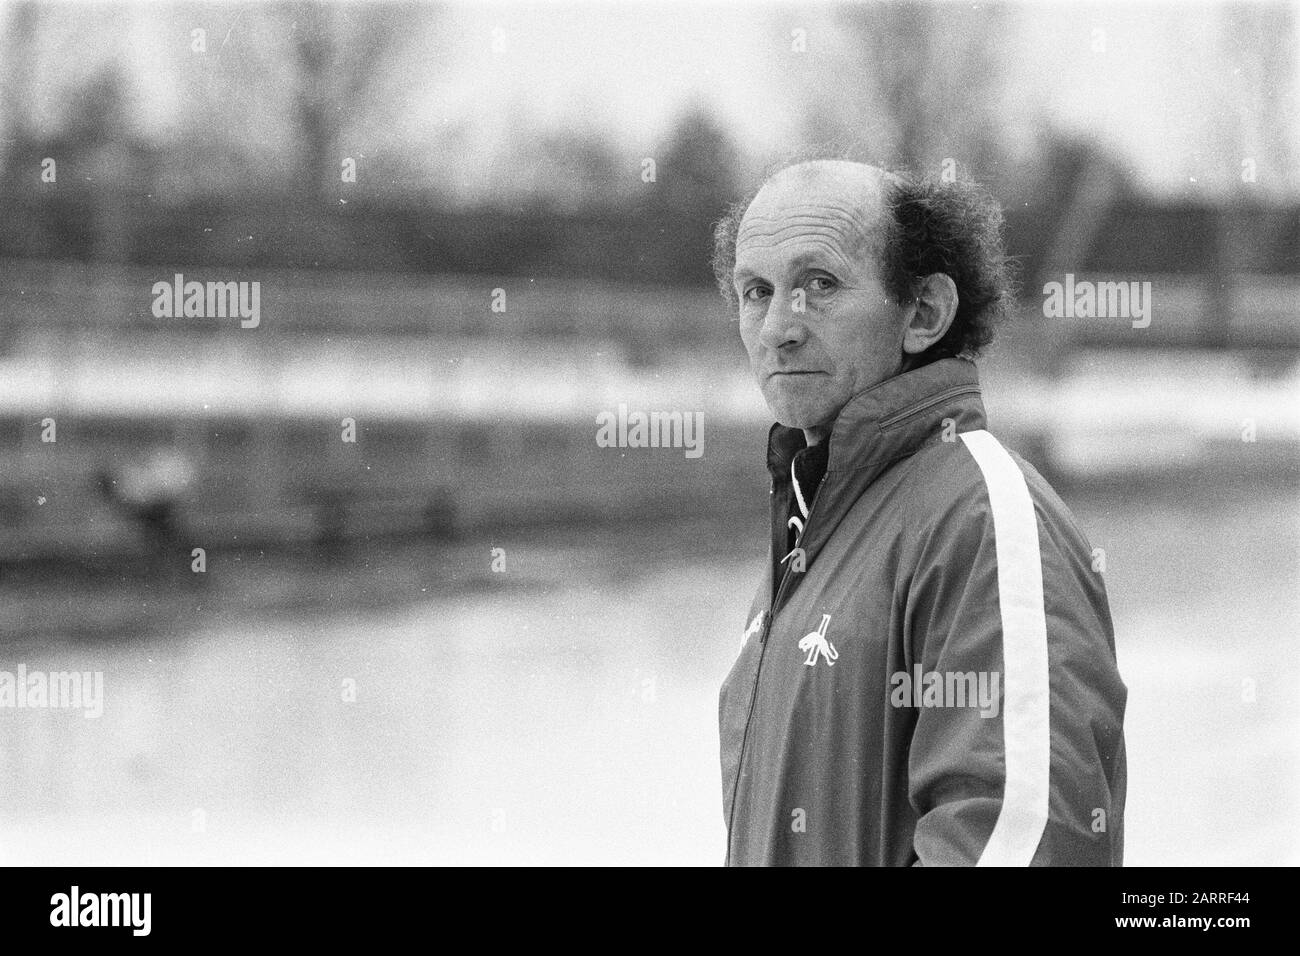 Ice skating competitions to the IJsselcup in Deventer. Coach of the national men's core team Egbert van't Oever. Date: 23 November 1980 Location: Deventer Keywords: skating, sport Person name: IJsselcup Institution name: Oever, Egbert van't Stock Photo